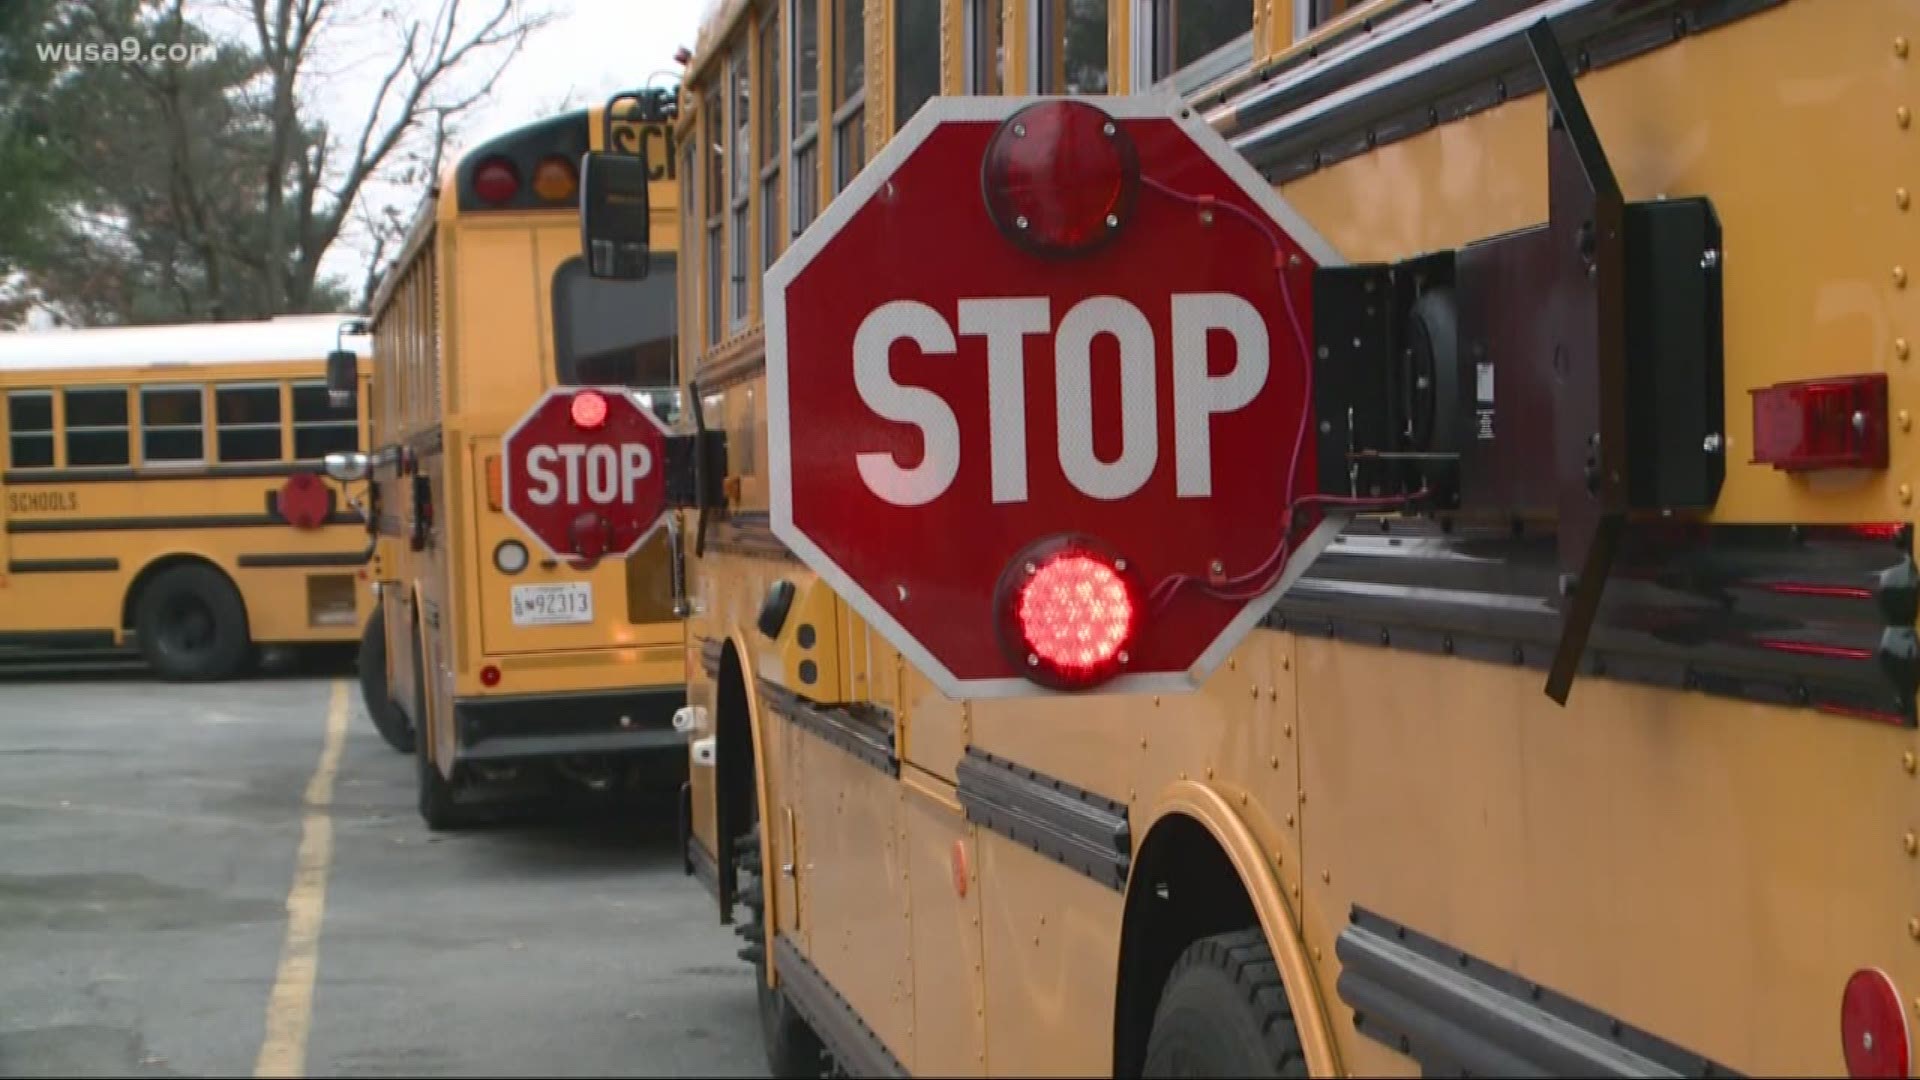 A report from the county inspector general raised questions about the company behind the school bus camera system that's credited with protecting kids.